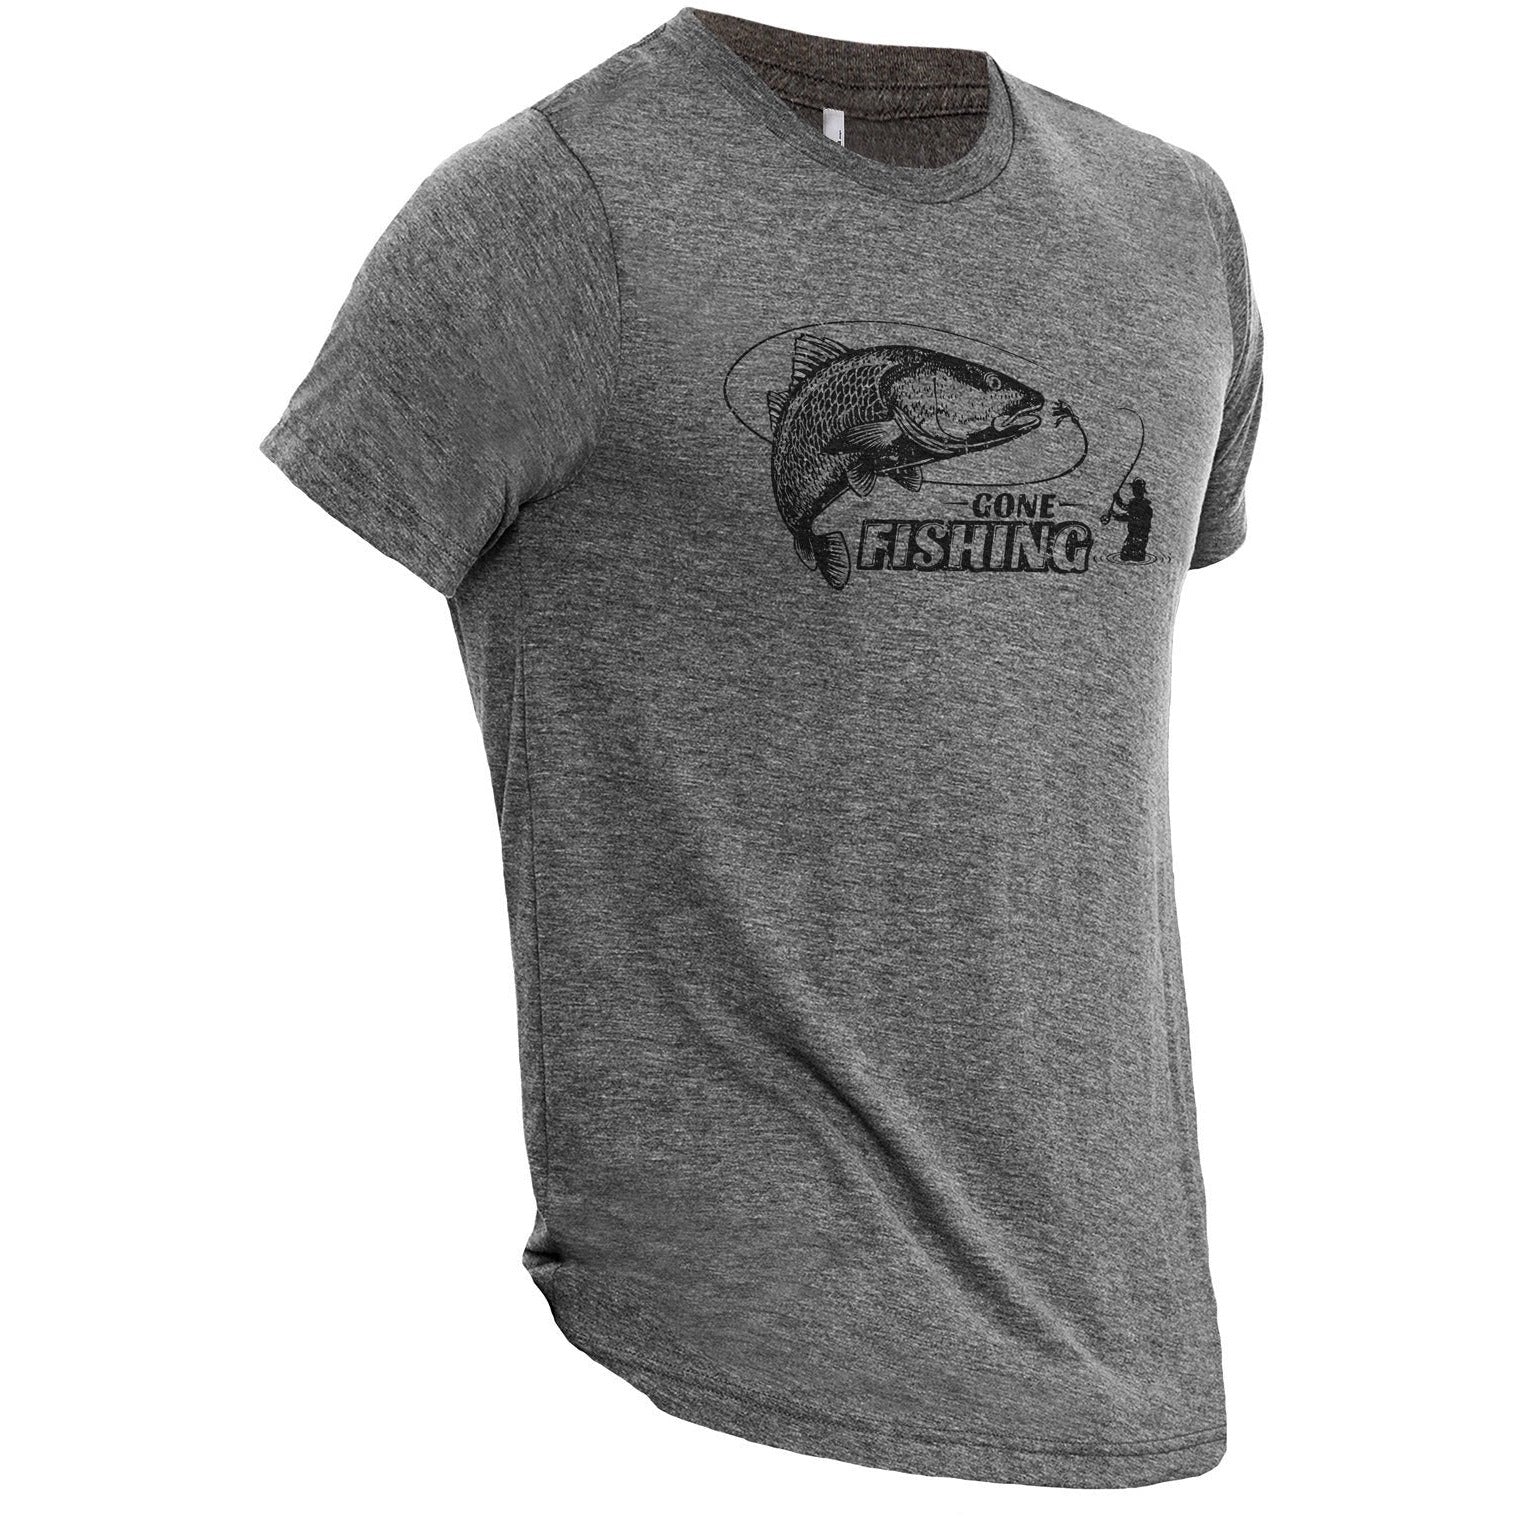 Gone Fishing Heather Grey Printed Graphic Men's Crew T-Shirt Tee Side View